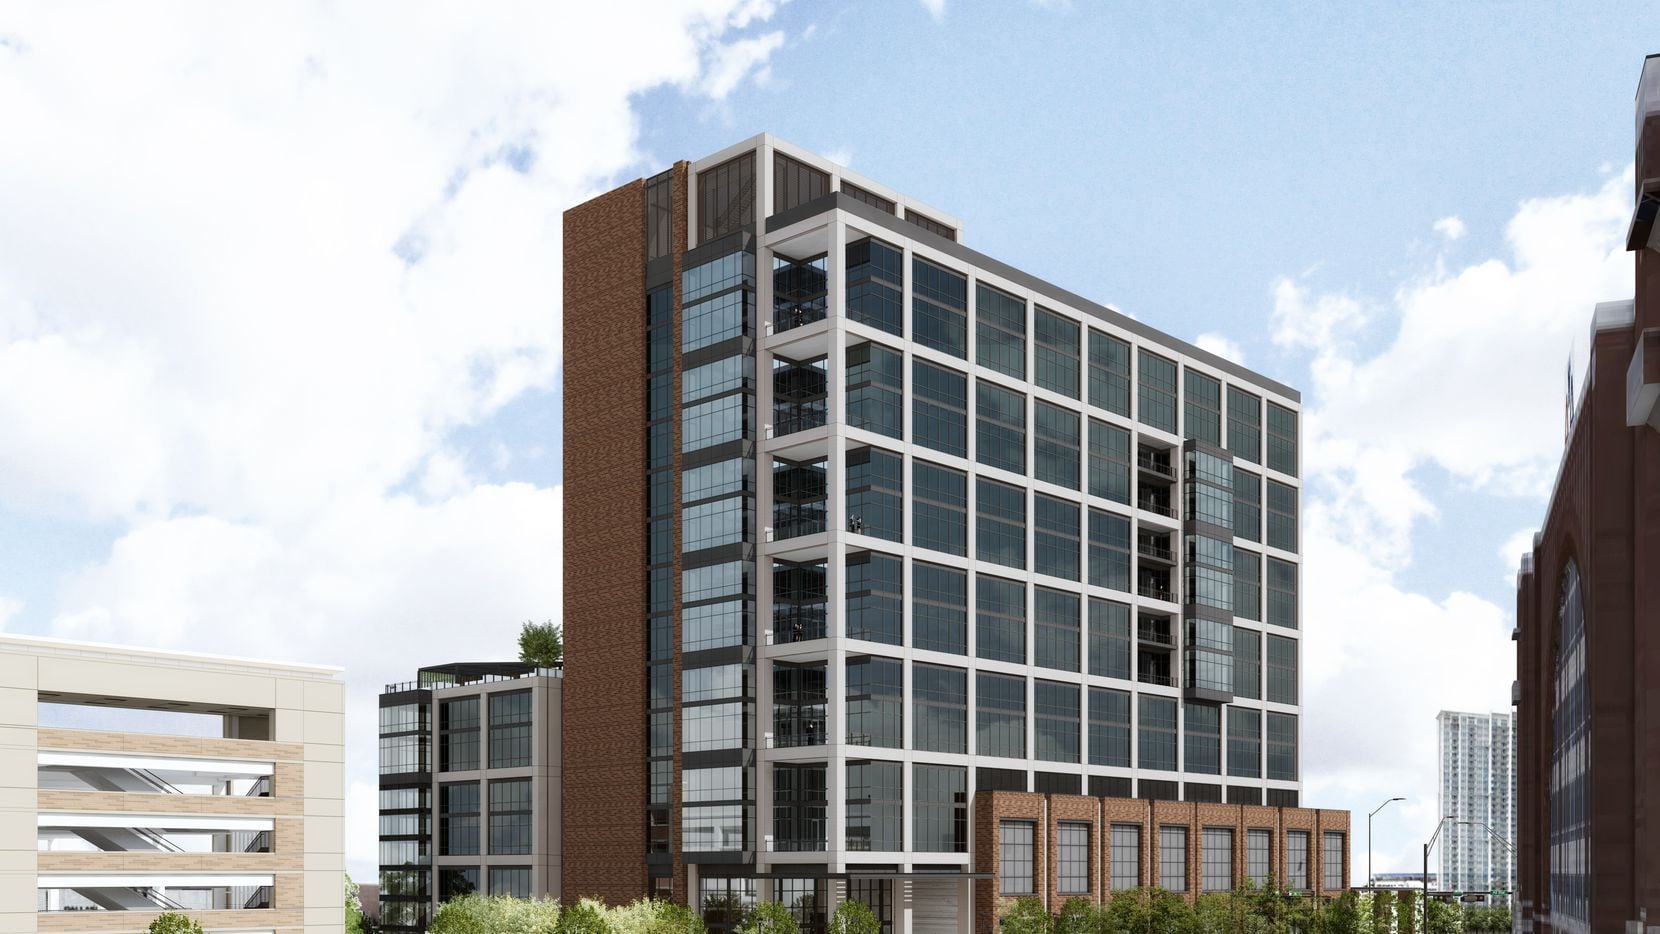 Hillwood Urban is hunting tenants for a 15-story office building in Dallas' Victory Park.